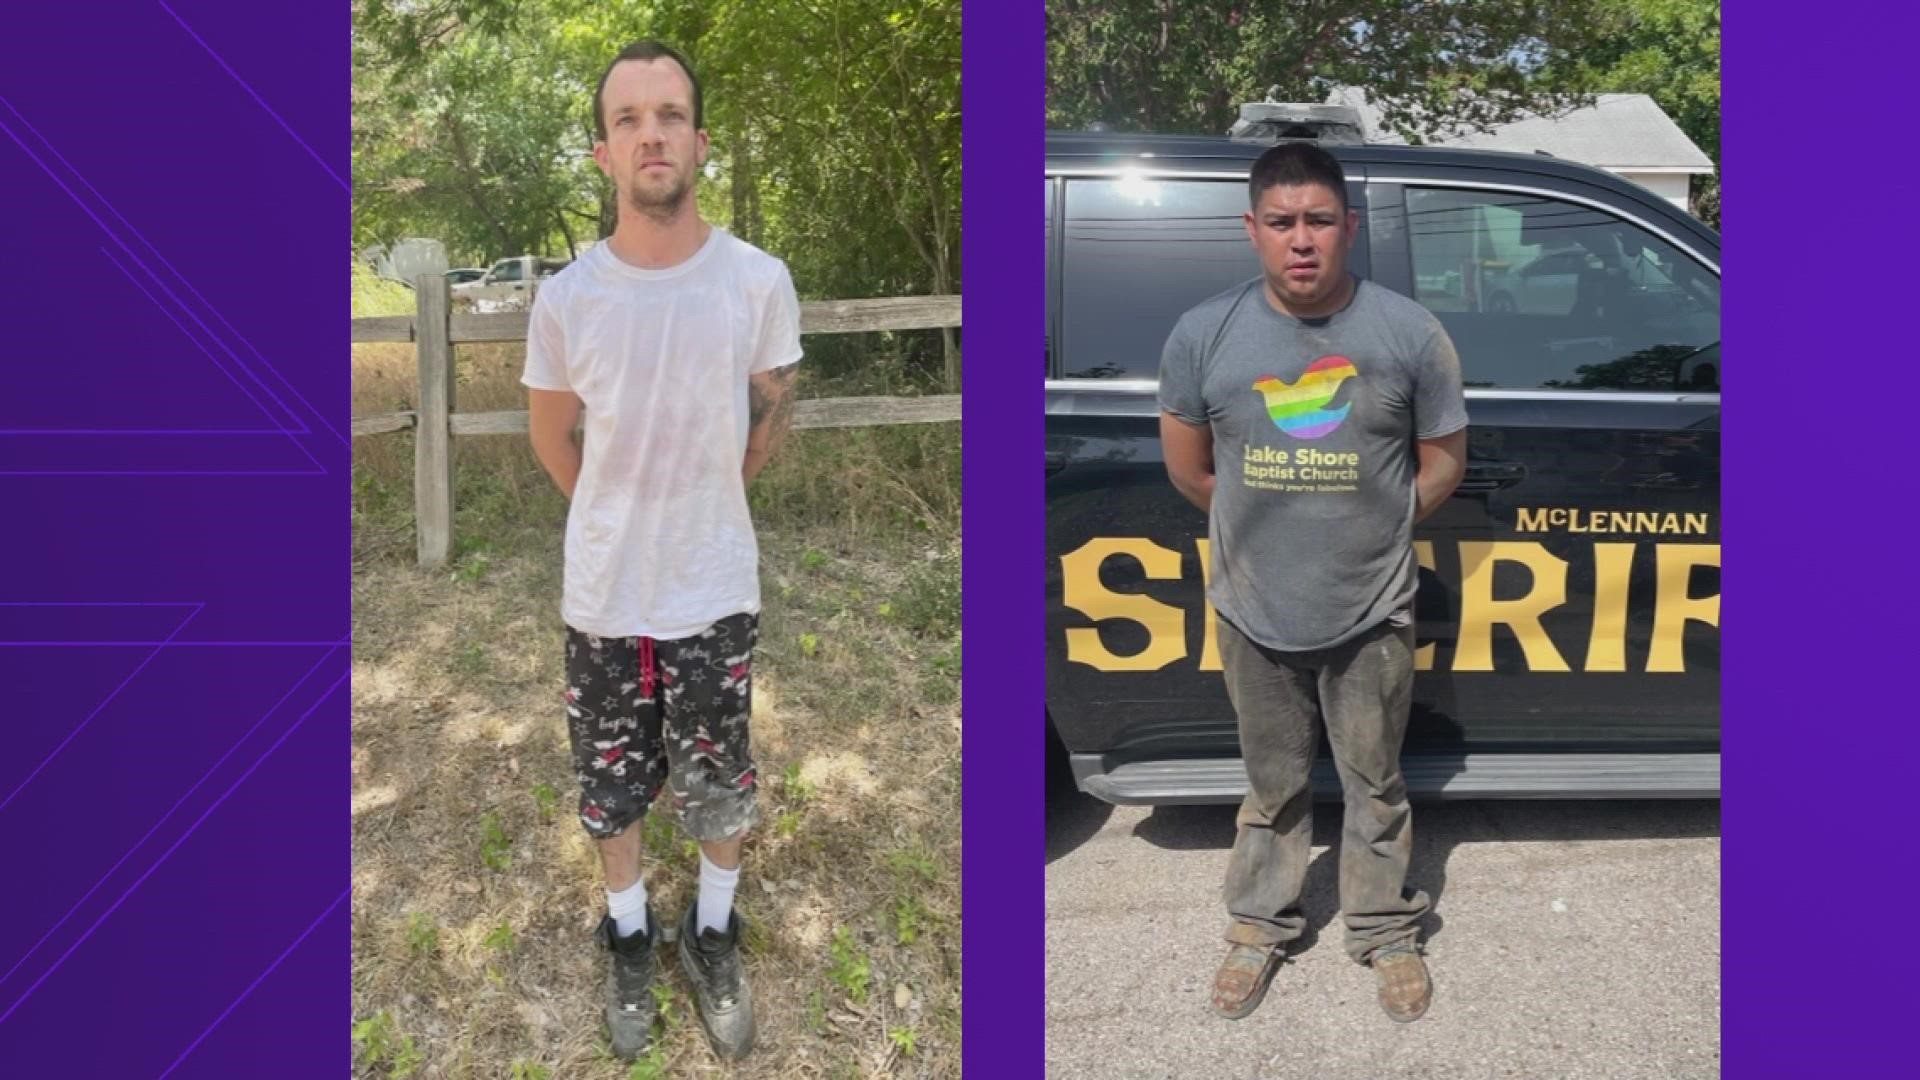 The McLennan County Sheriff's Office said three people are now charged in connection with the girls' disappearance.